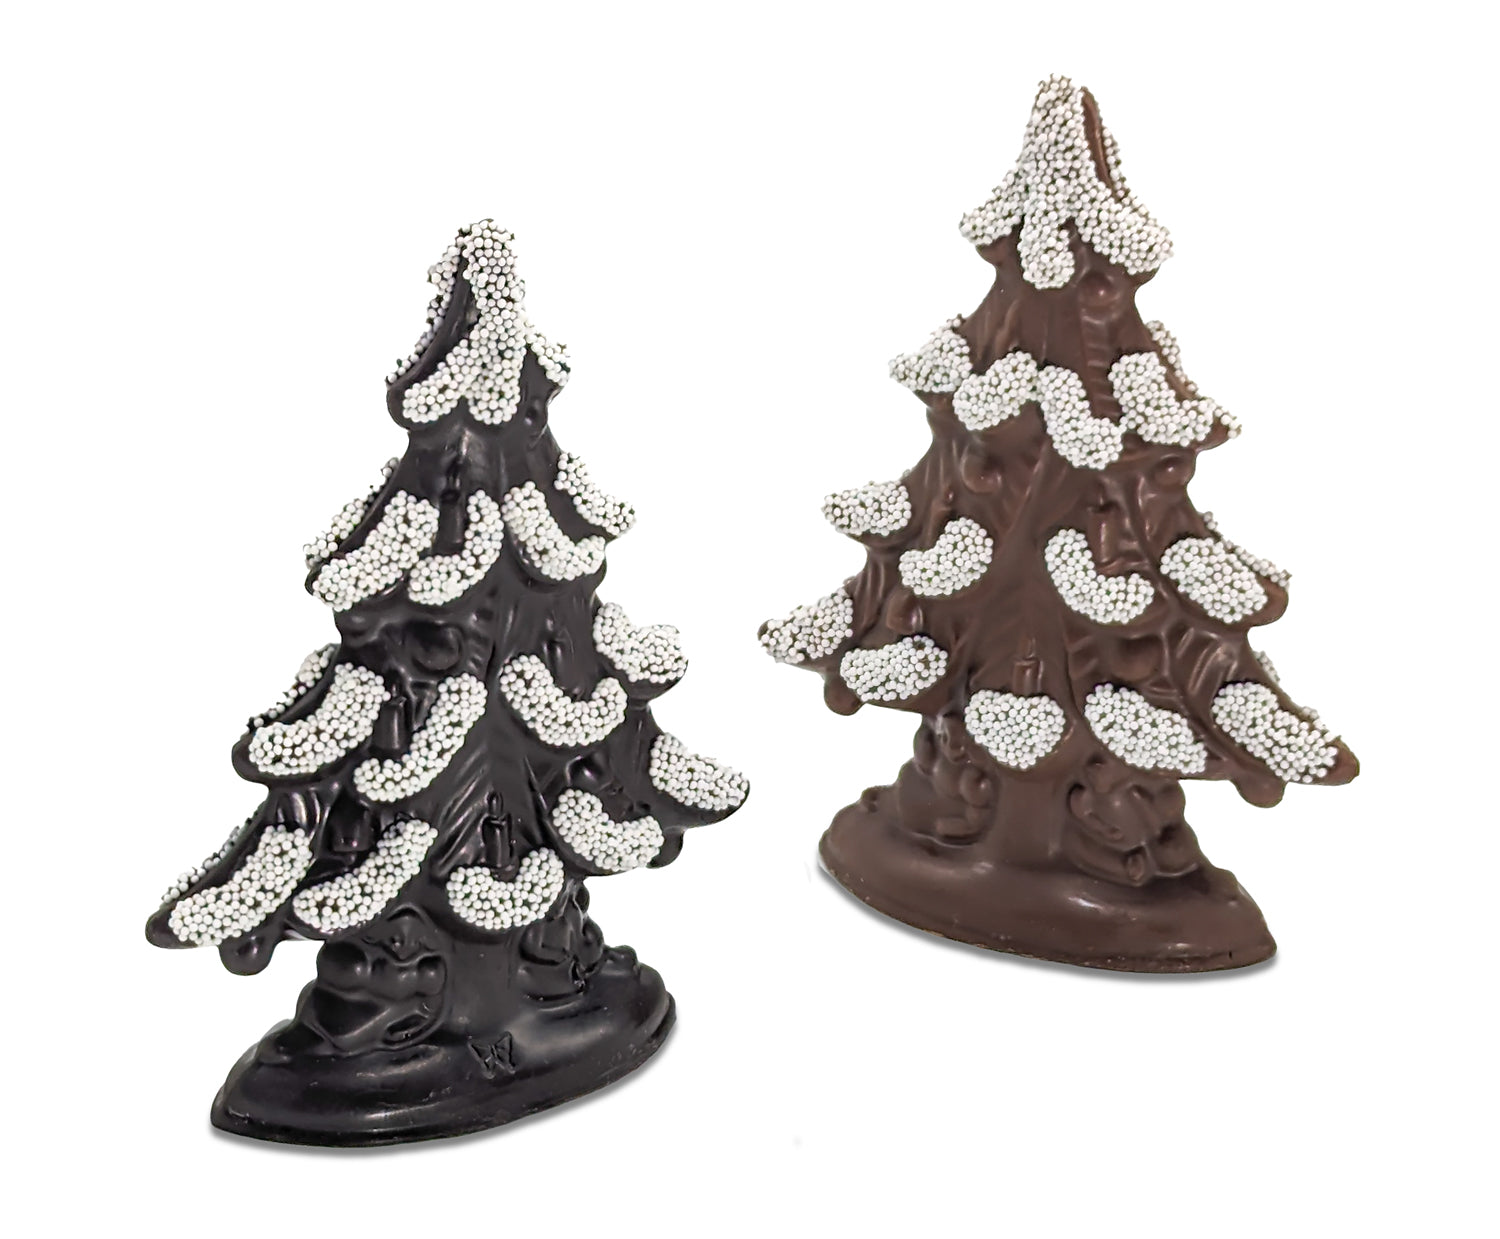 Solid chocolate standing Christmas trees in MK and DK chocolate